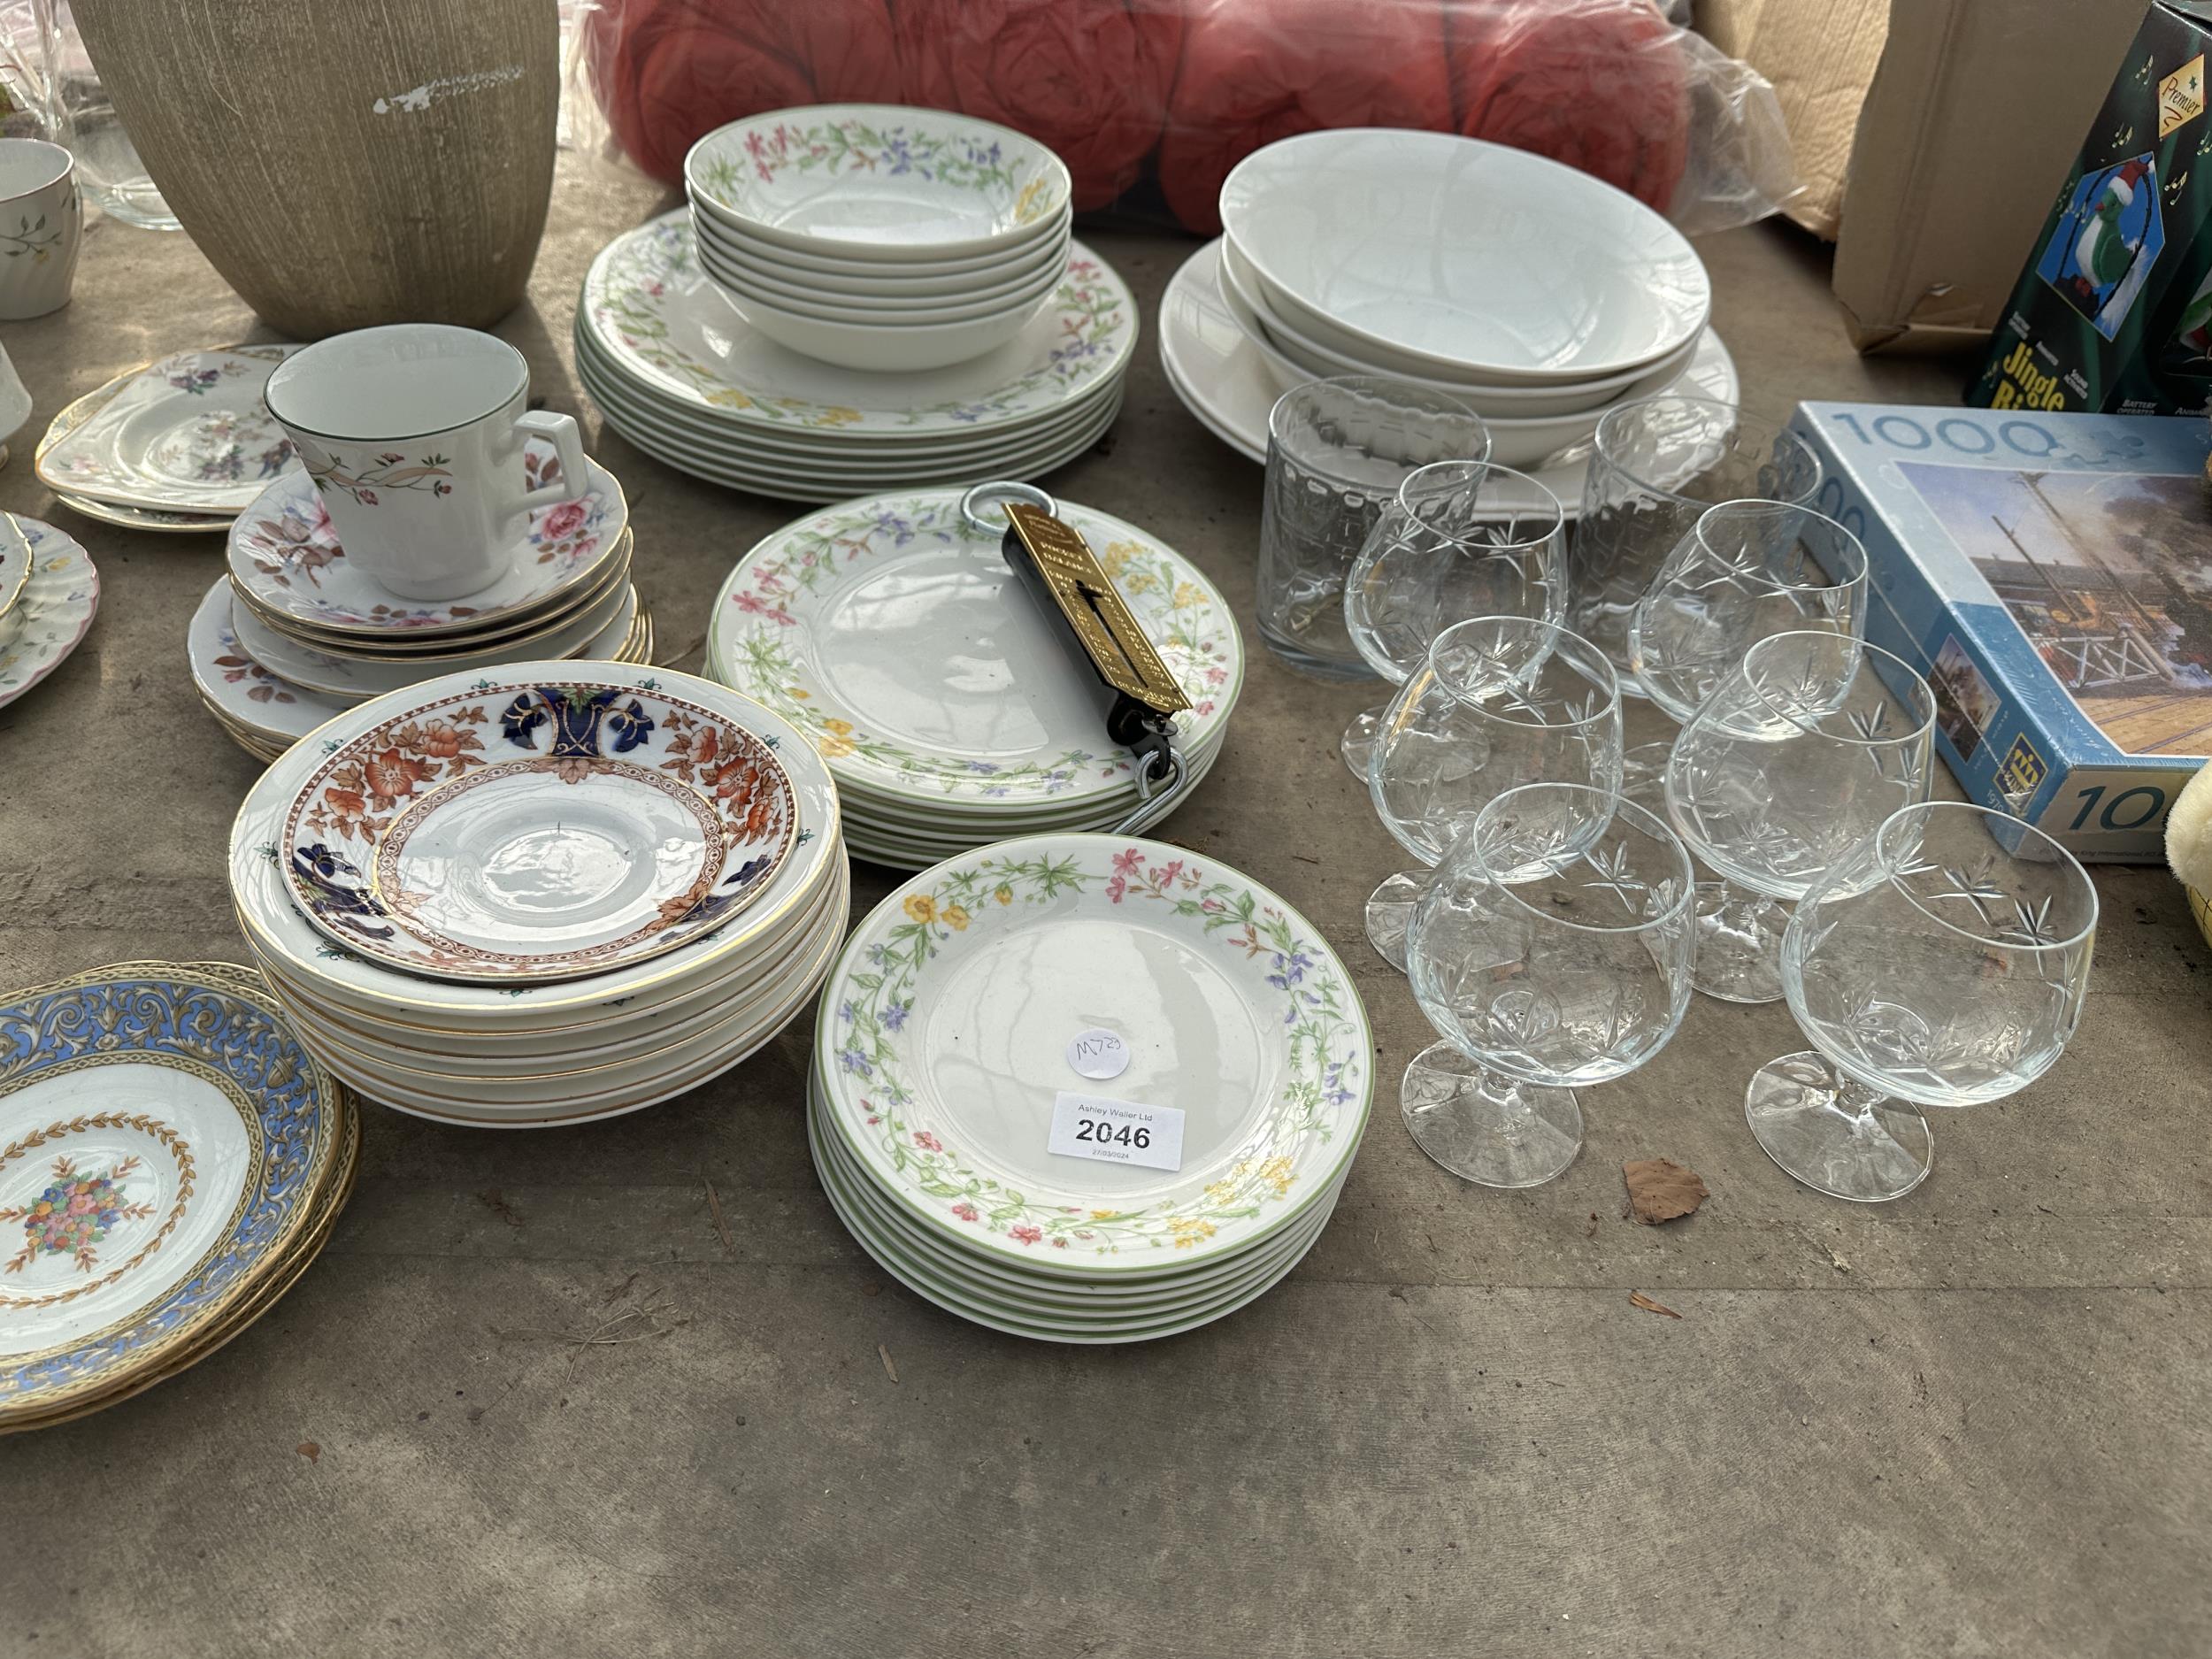 A LARGE ASSORTMENT OF CERAMICS AND GLASS WARE TO INCLUDE BOWLS, PLATES AND CUPS AND SAUCERS ETC - Image 2 of 4